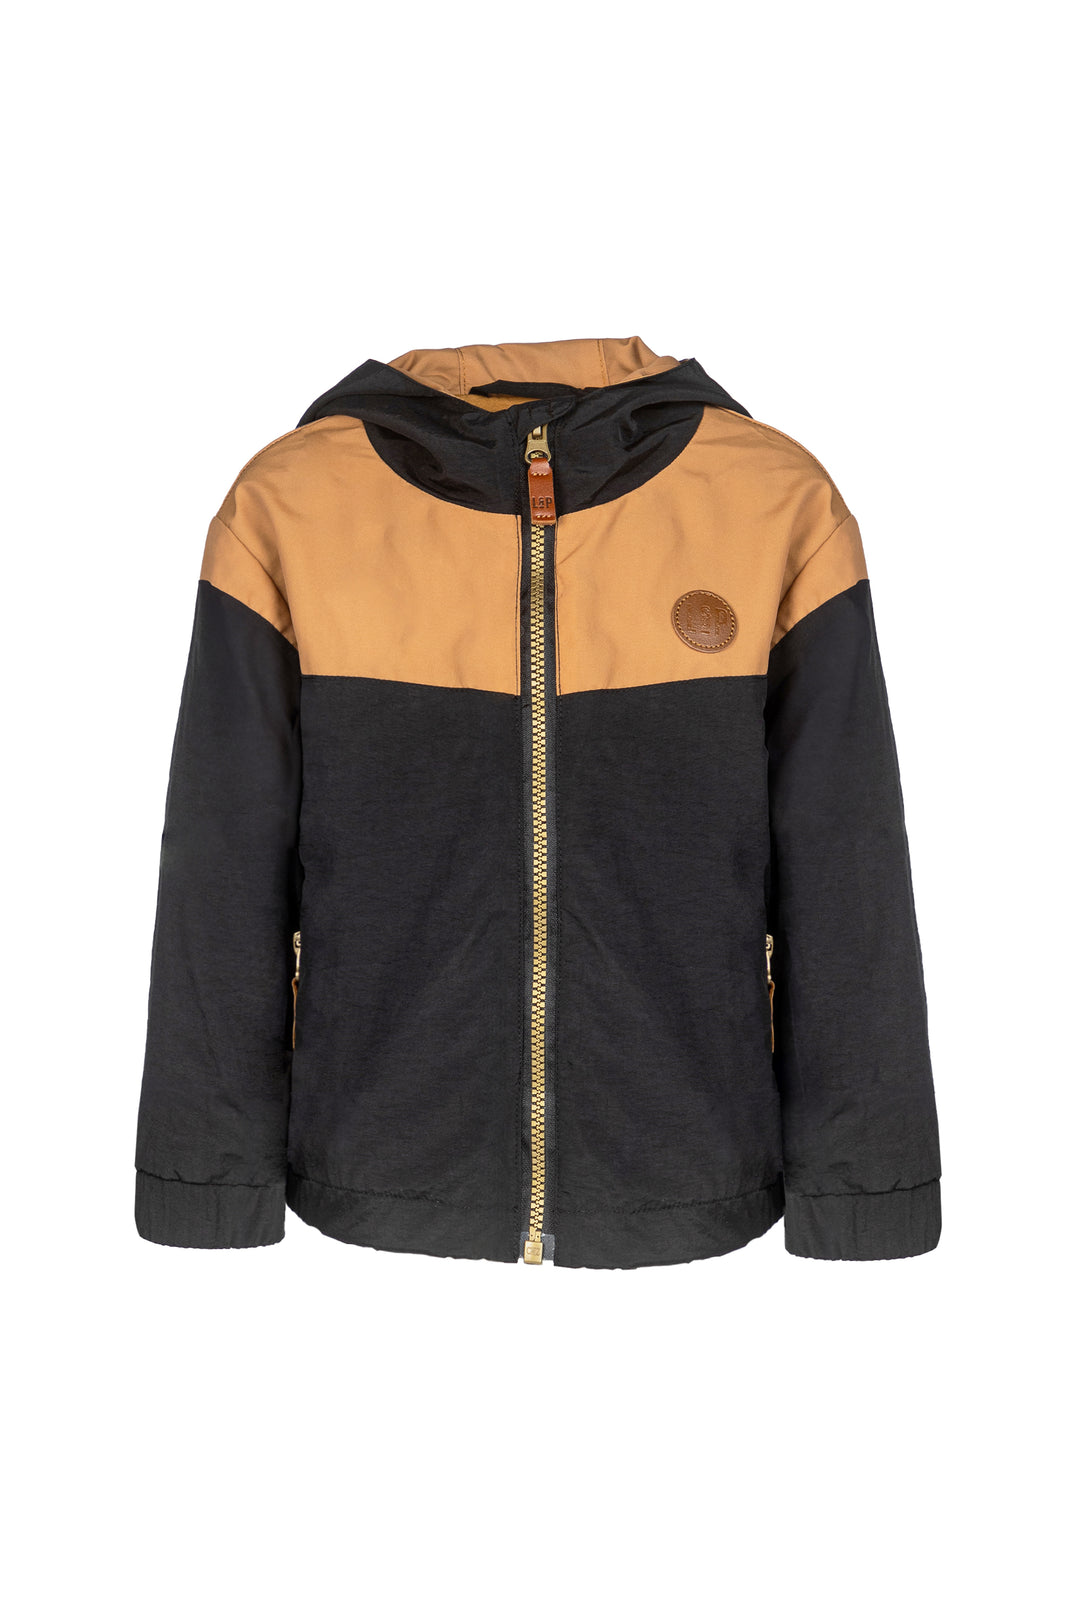 Cotton Lined Outdoor Jacket [224] [Kids]